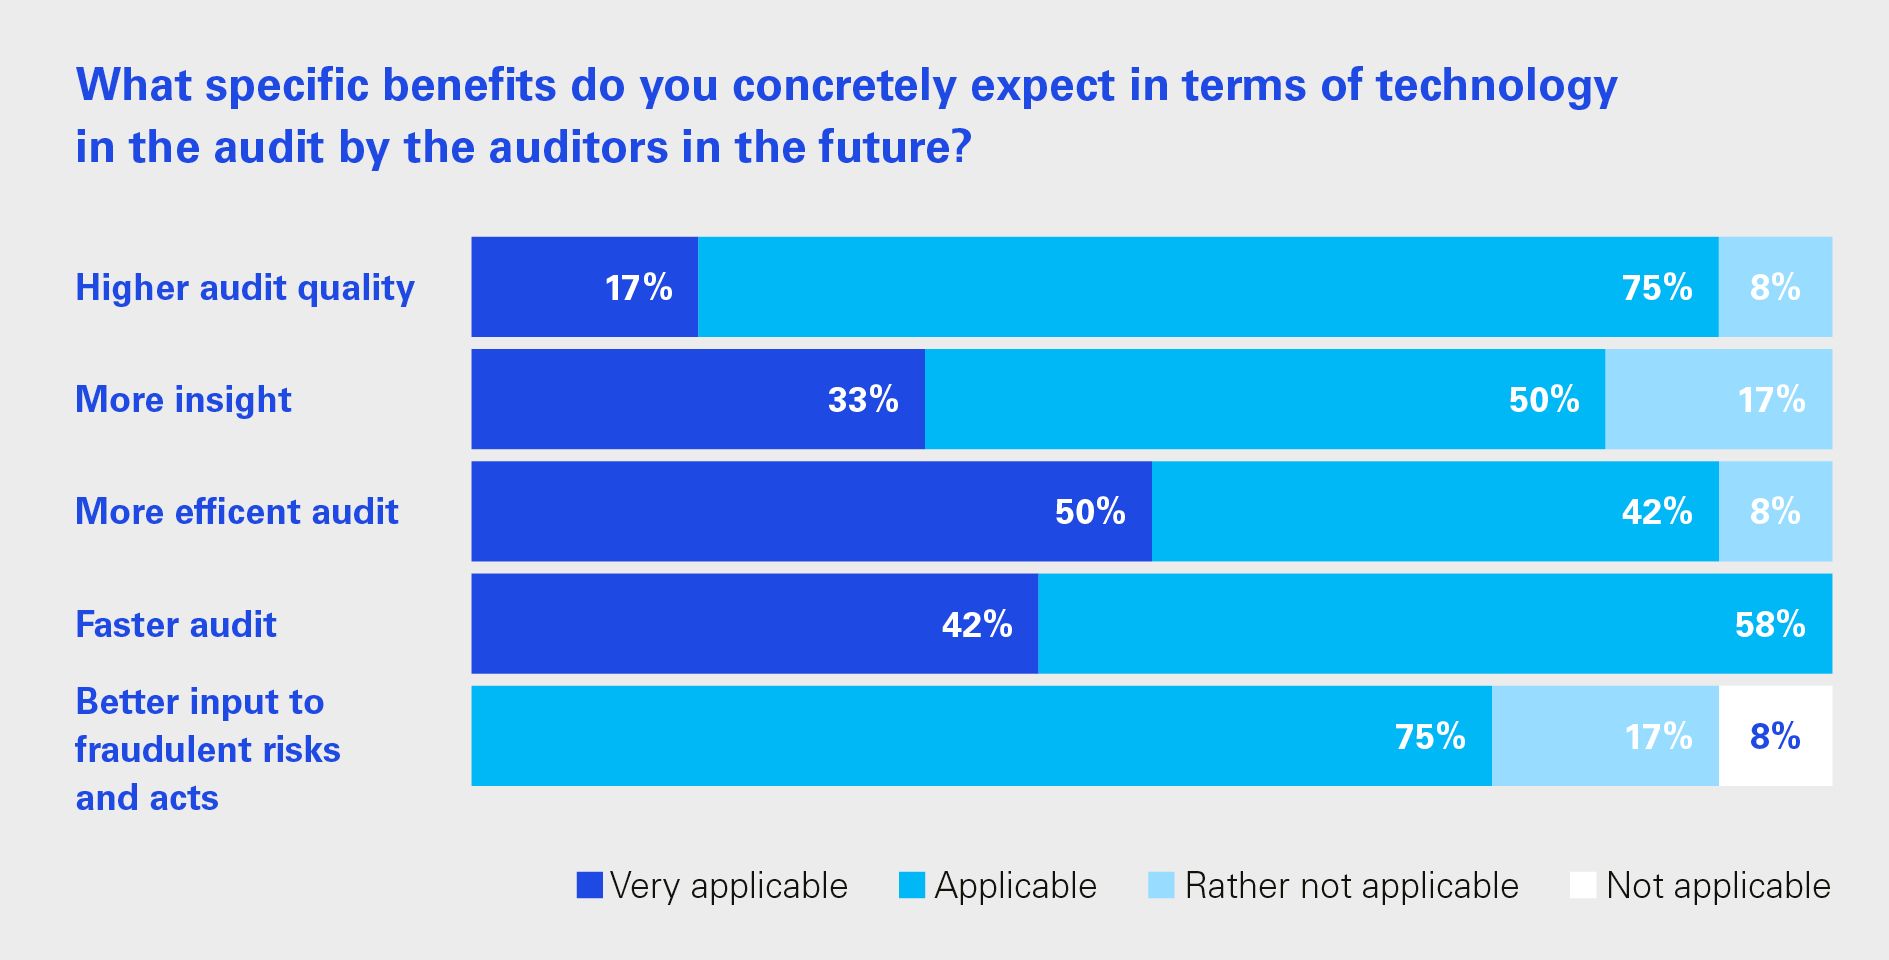 What specific benefits do you concretely expect in terms of technology in the audit by the auditors in the future?